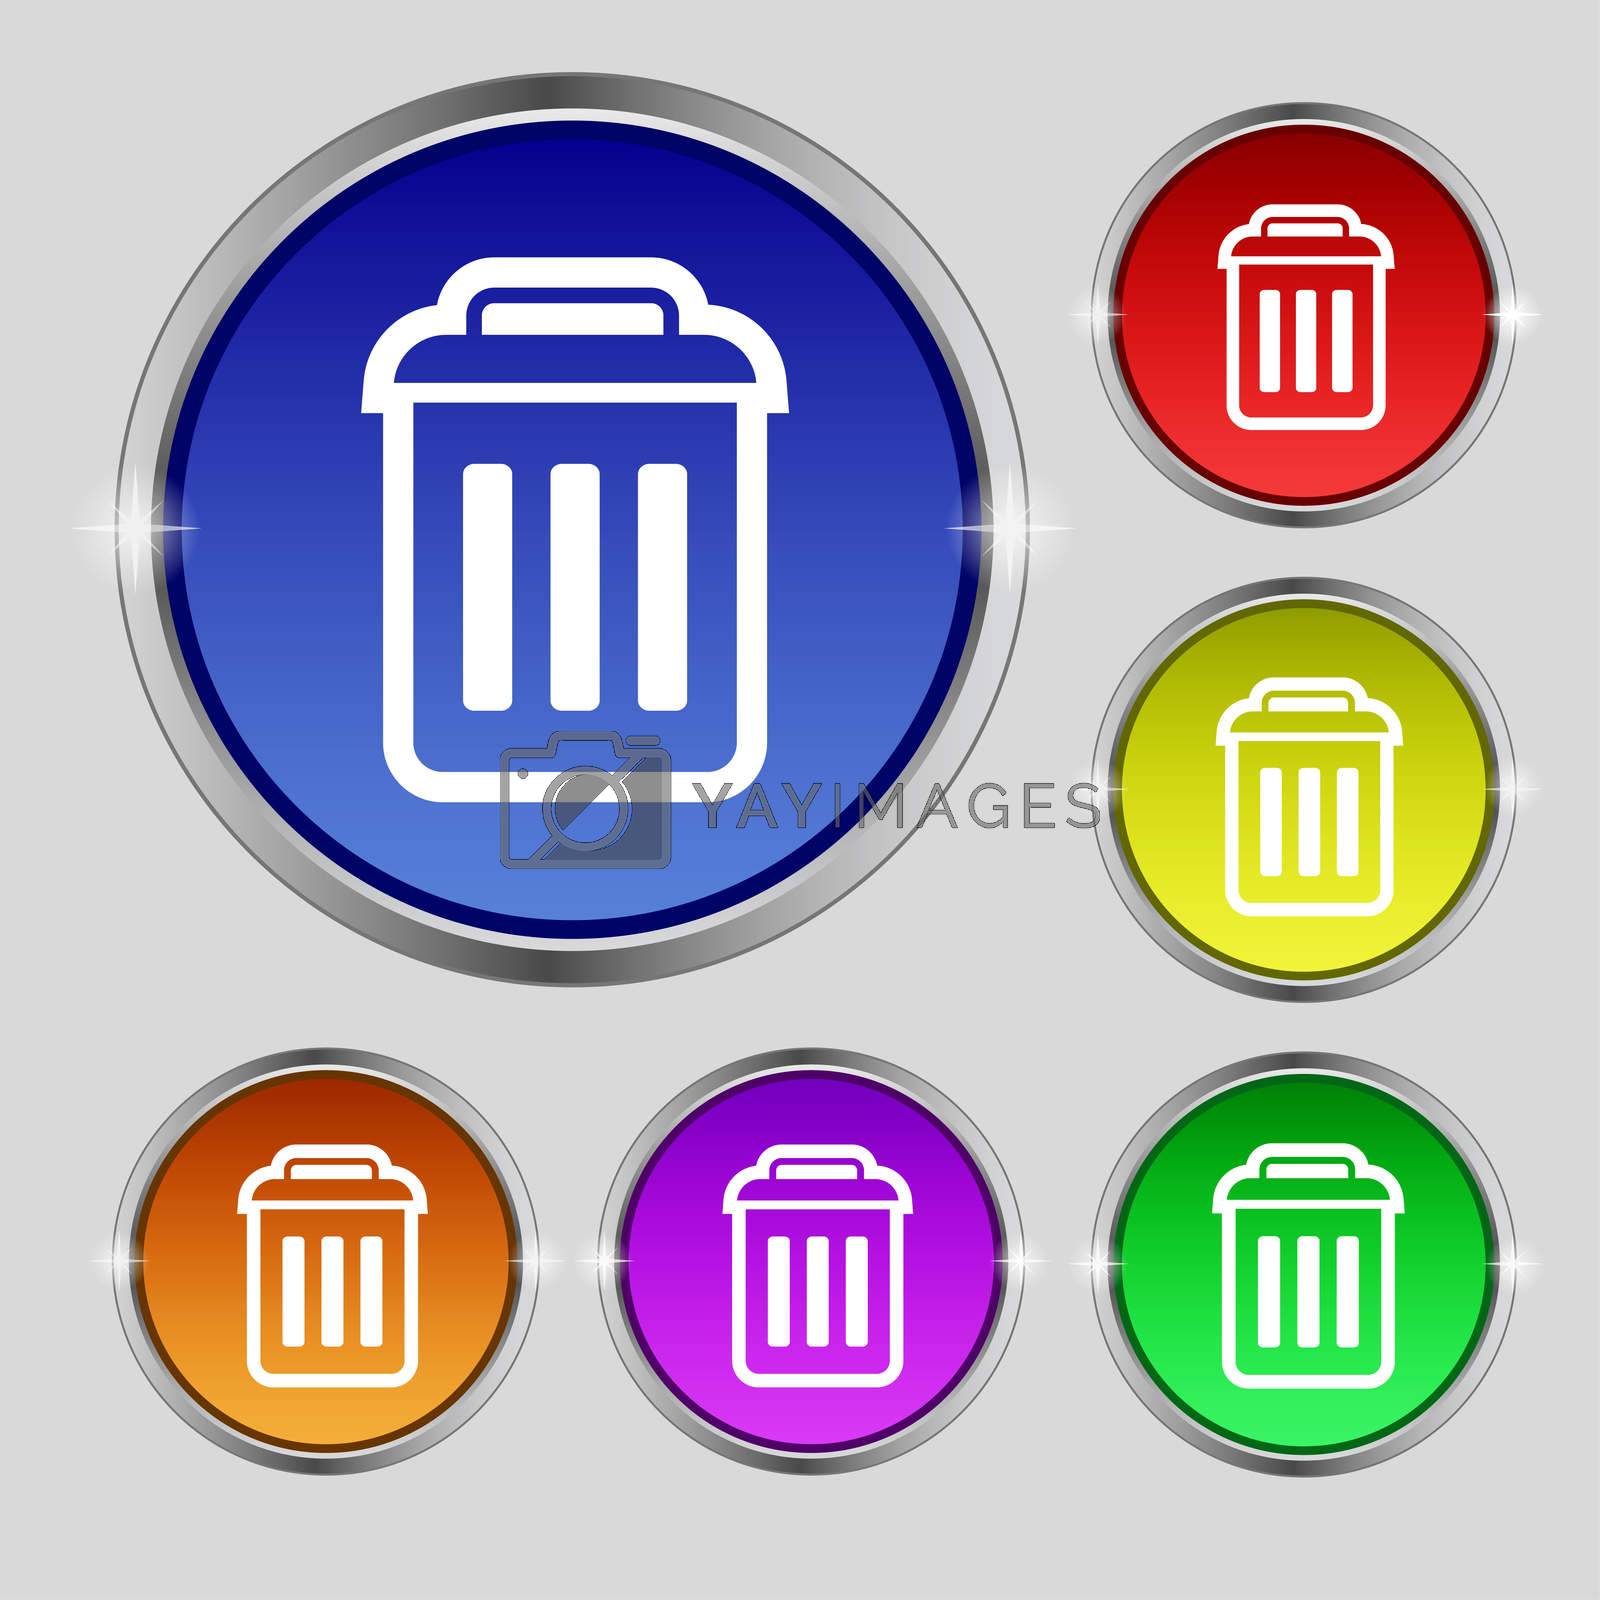 Royalty free image of the trash icon sign. Round symbol on bright colourful buttons.  by serhii_lohvyniuk